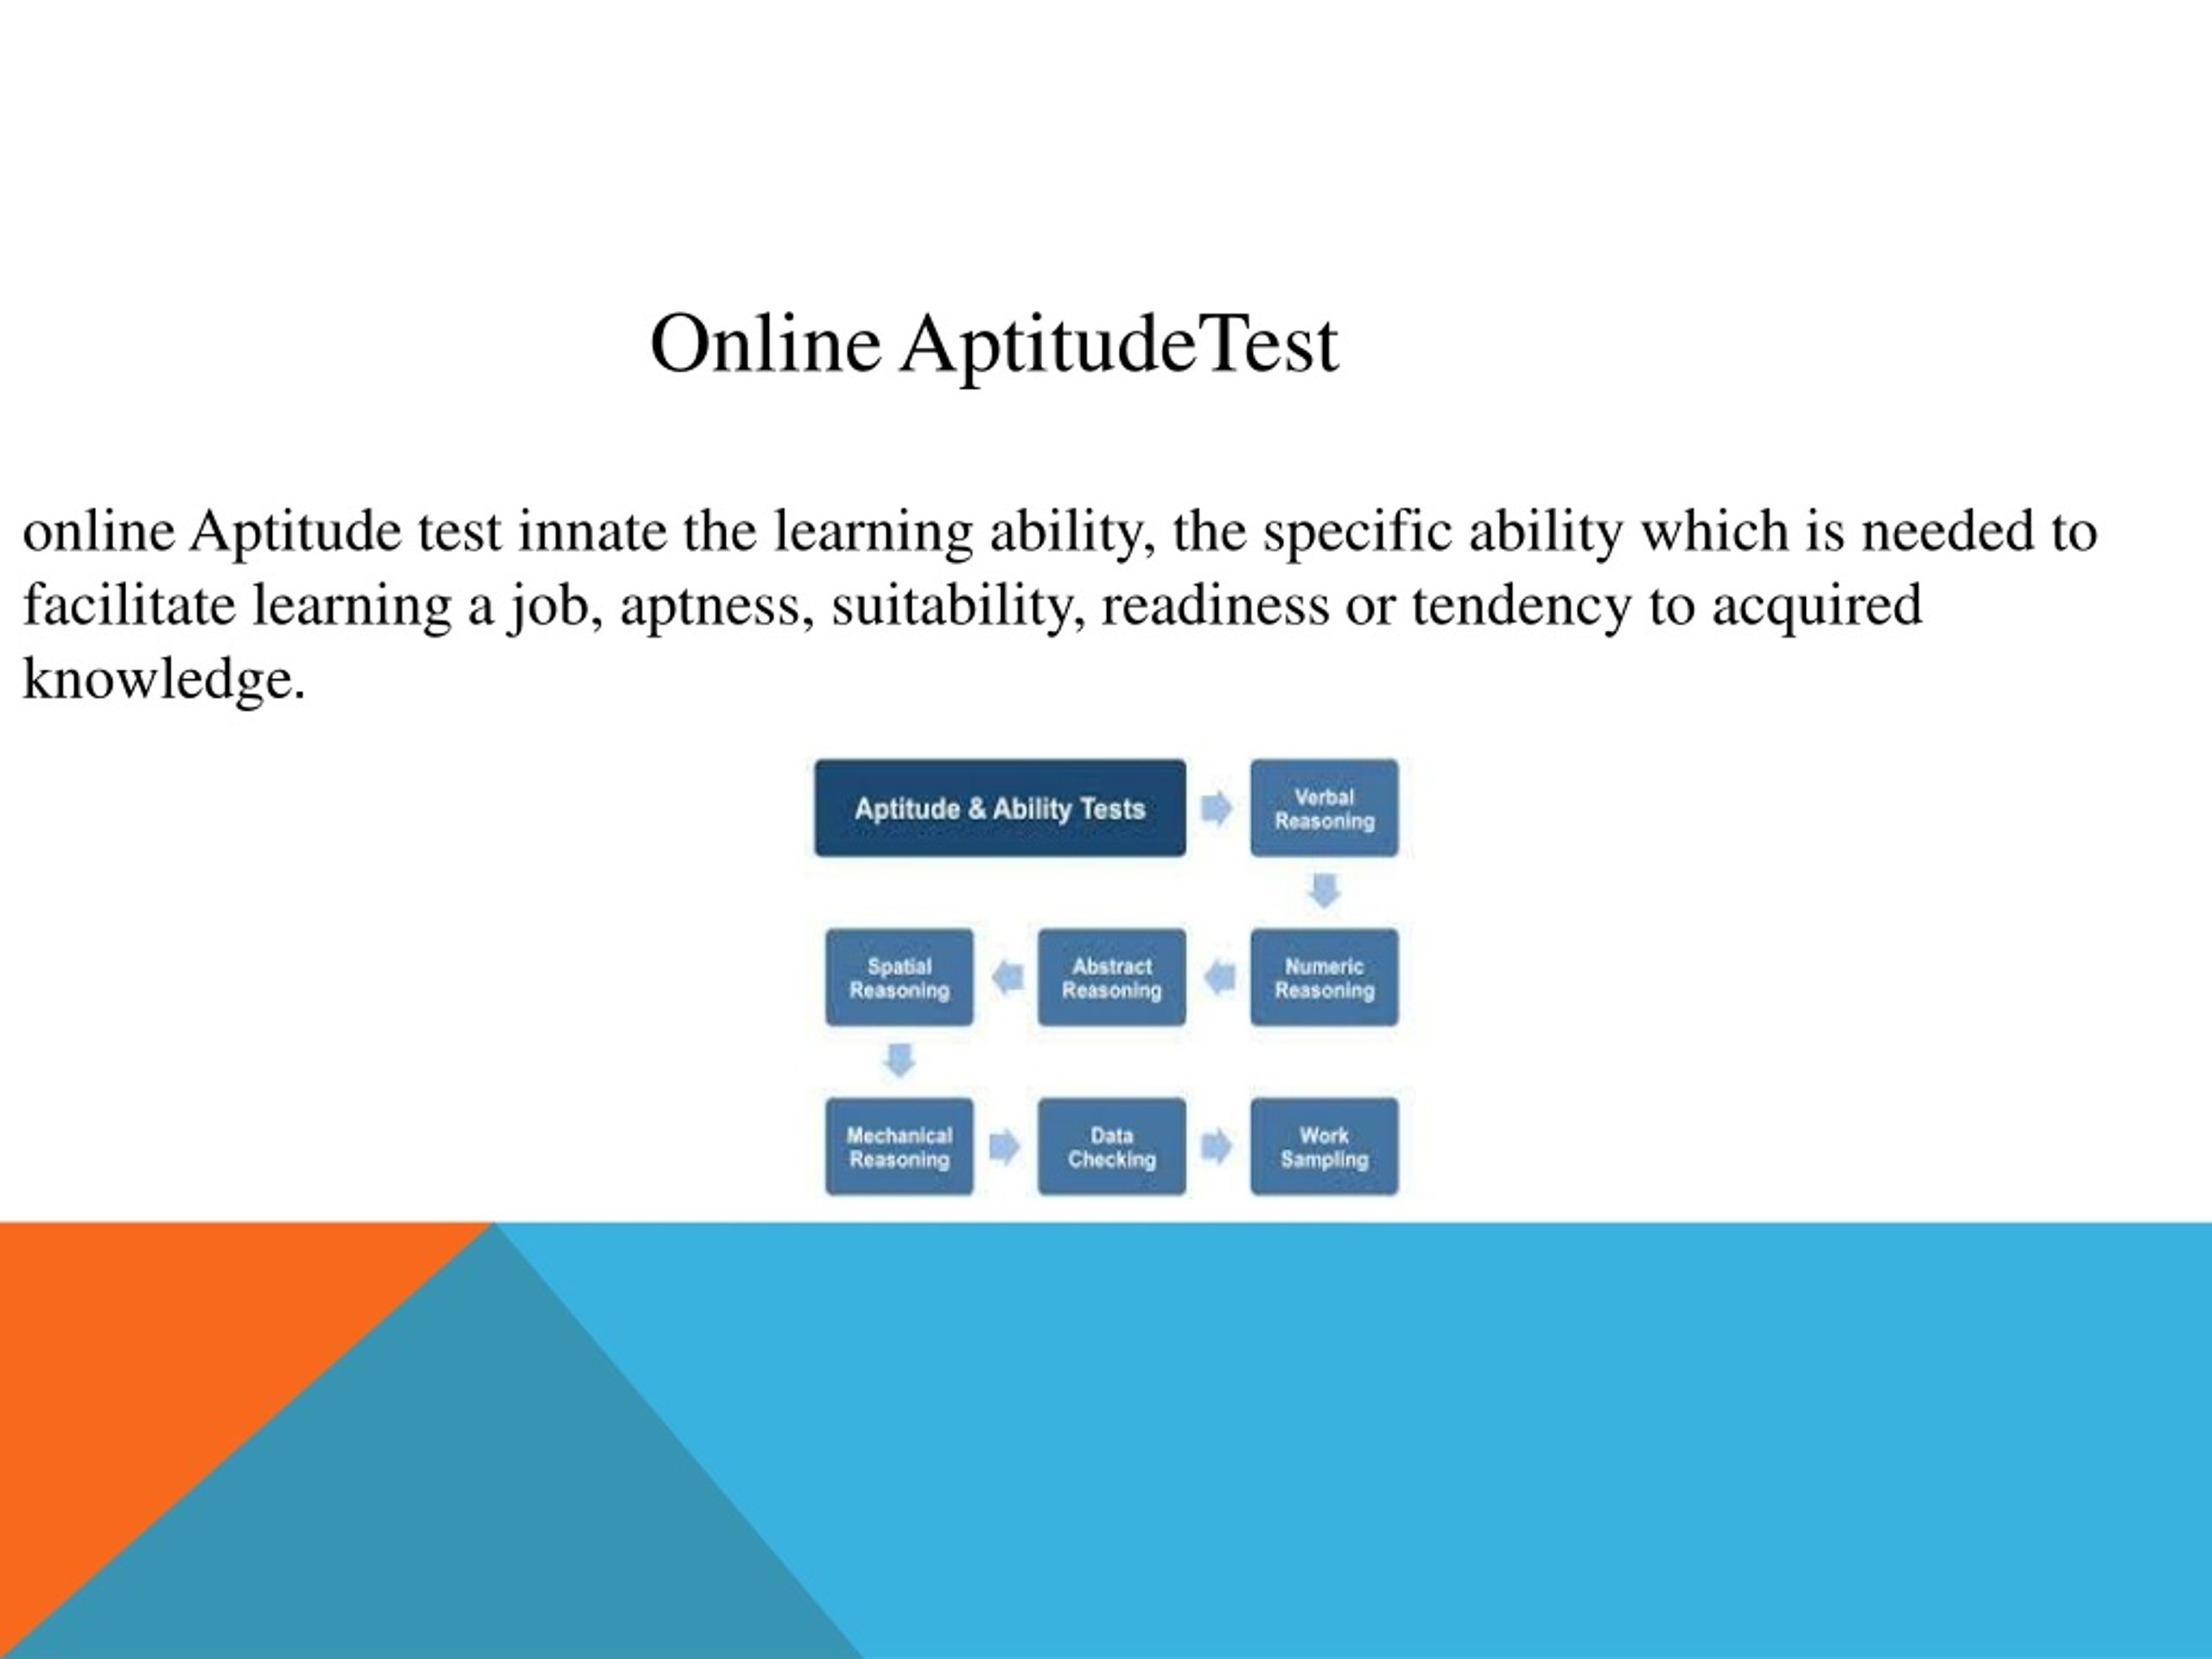 ways-in-which-online-aptitude-test-has-facilitated-recruitment